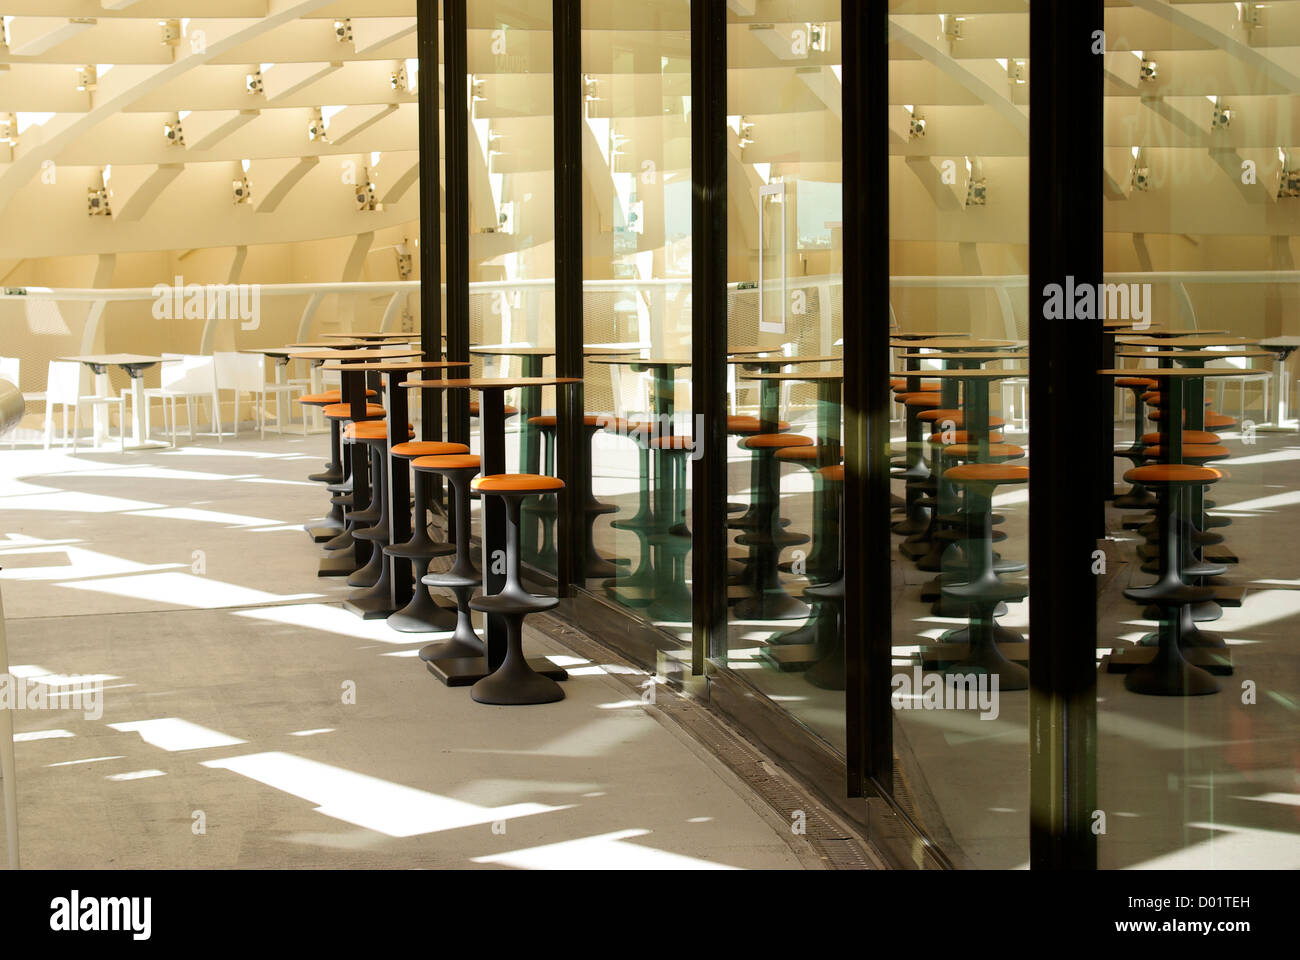 Restaurant stools and chairs reflected in windows on the viewing deck of the Metropol Parasol in Seville, Andalusia, Spain Stock Photo